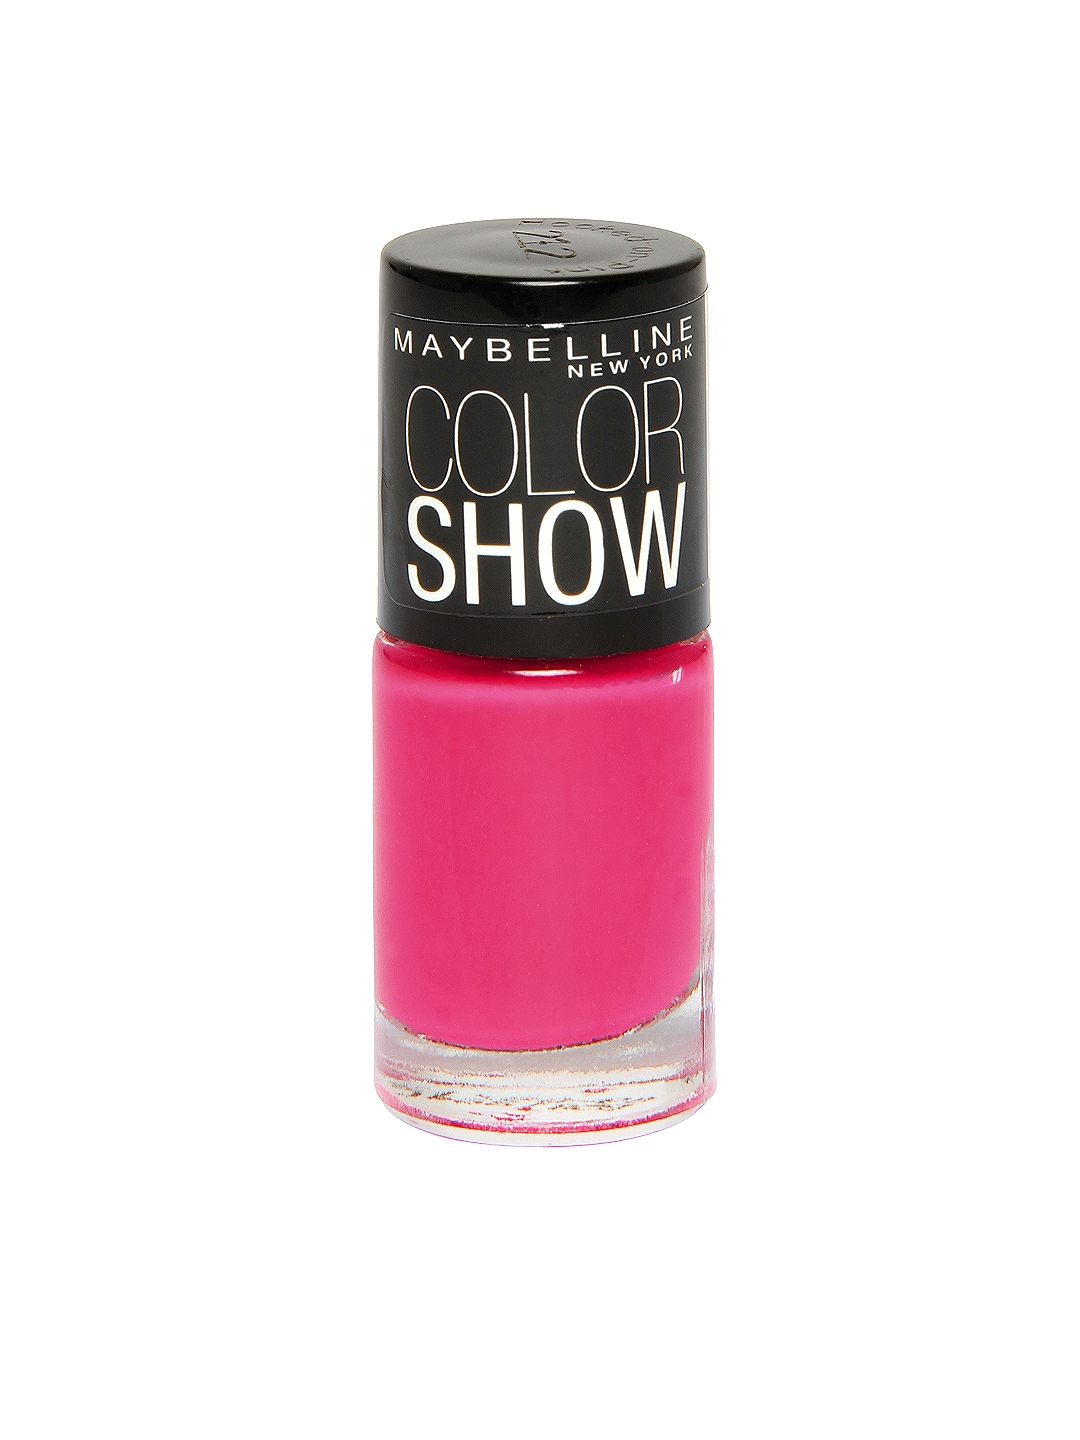 Maybelline Color Show Nail Polish Review with Swatches  StyleyourselfHub